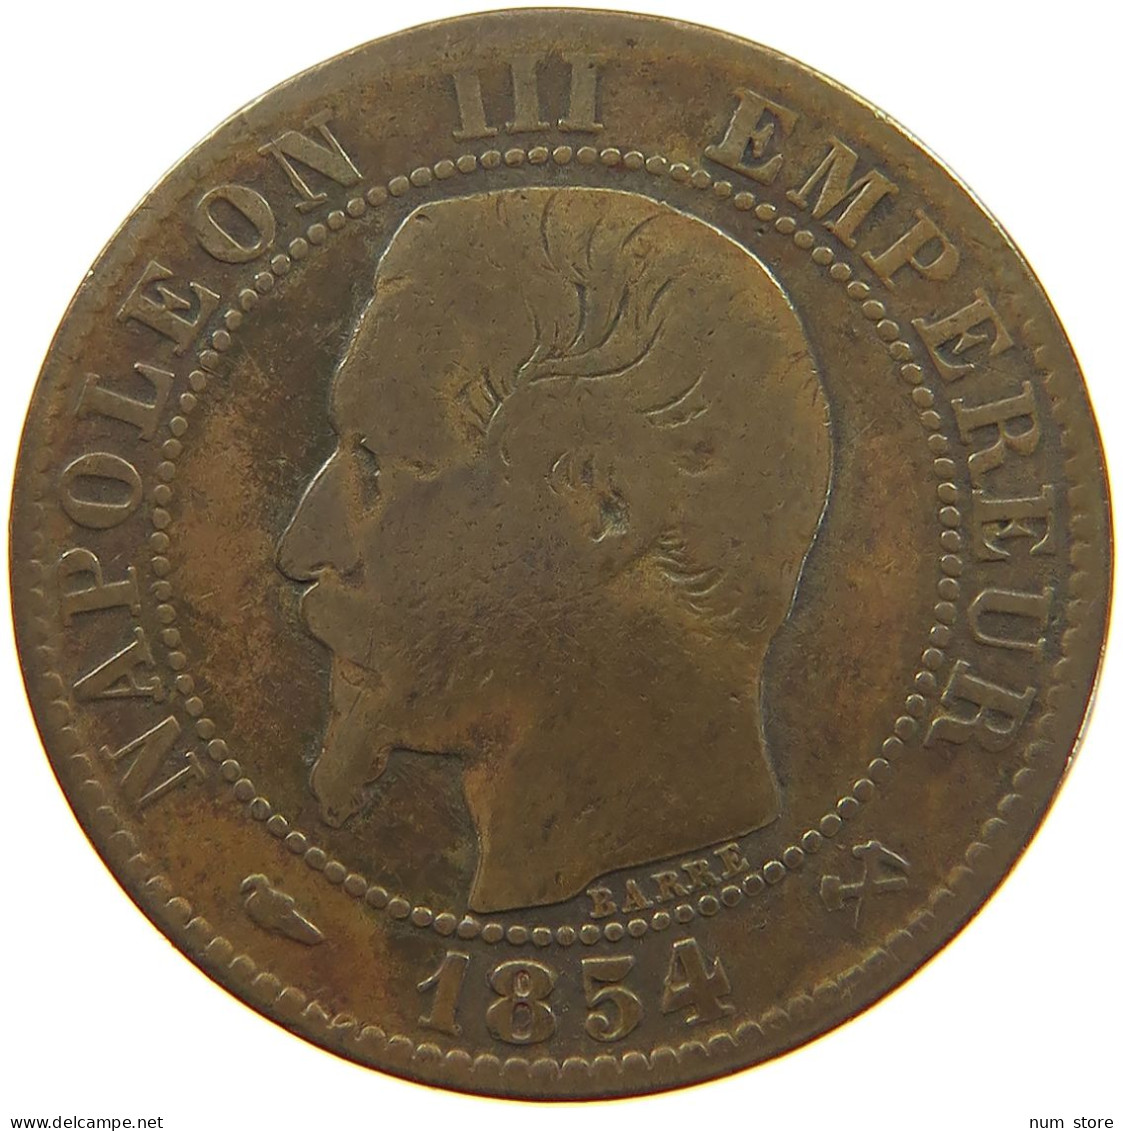 FRANCE 5 CENTIMES 1854 B #a059 0207 - 5 Centimes